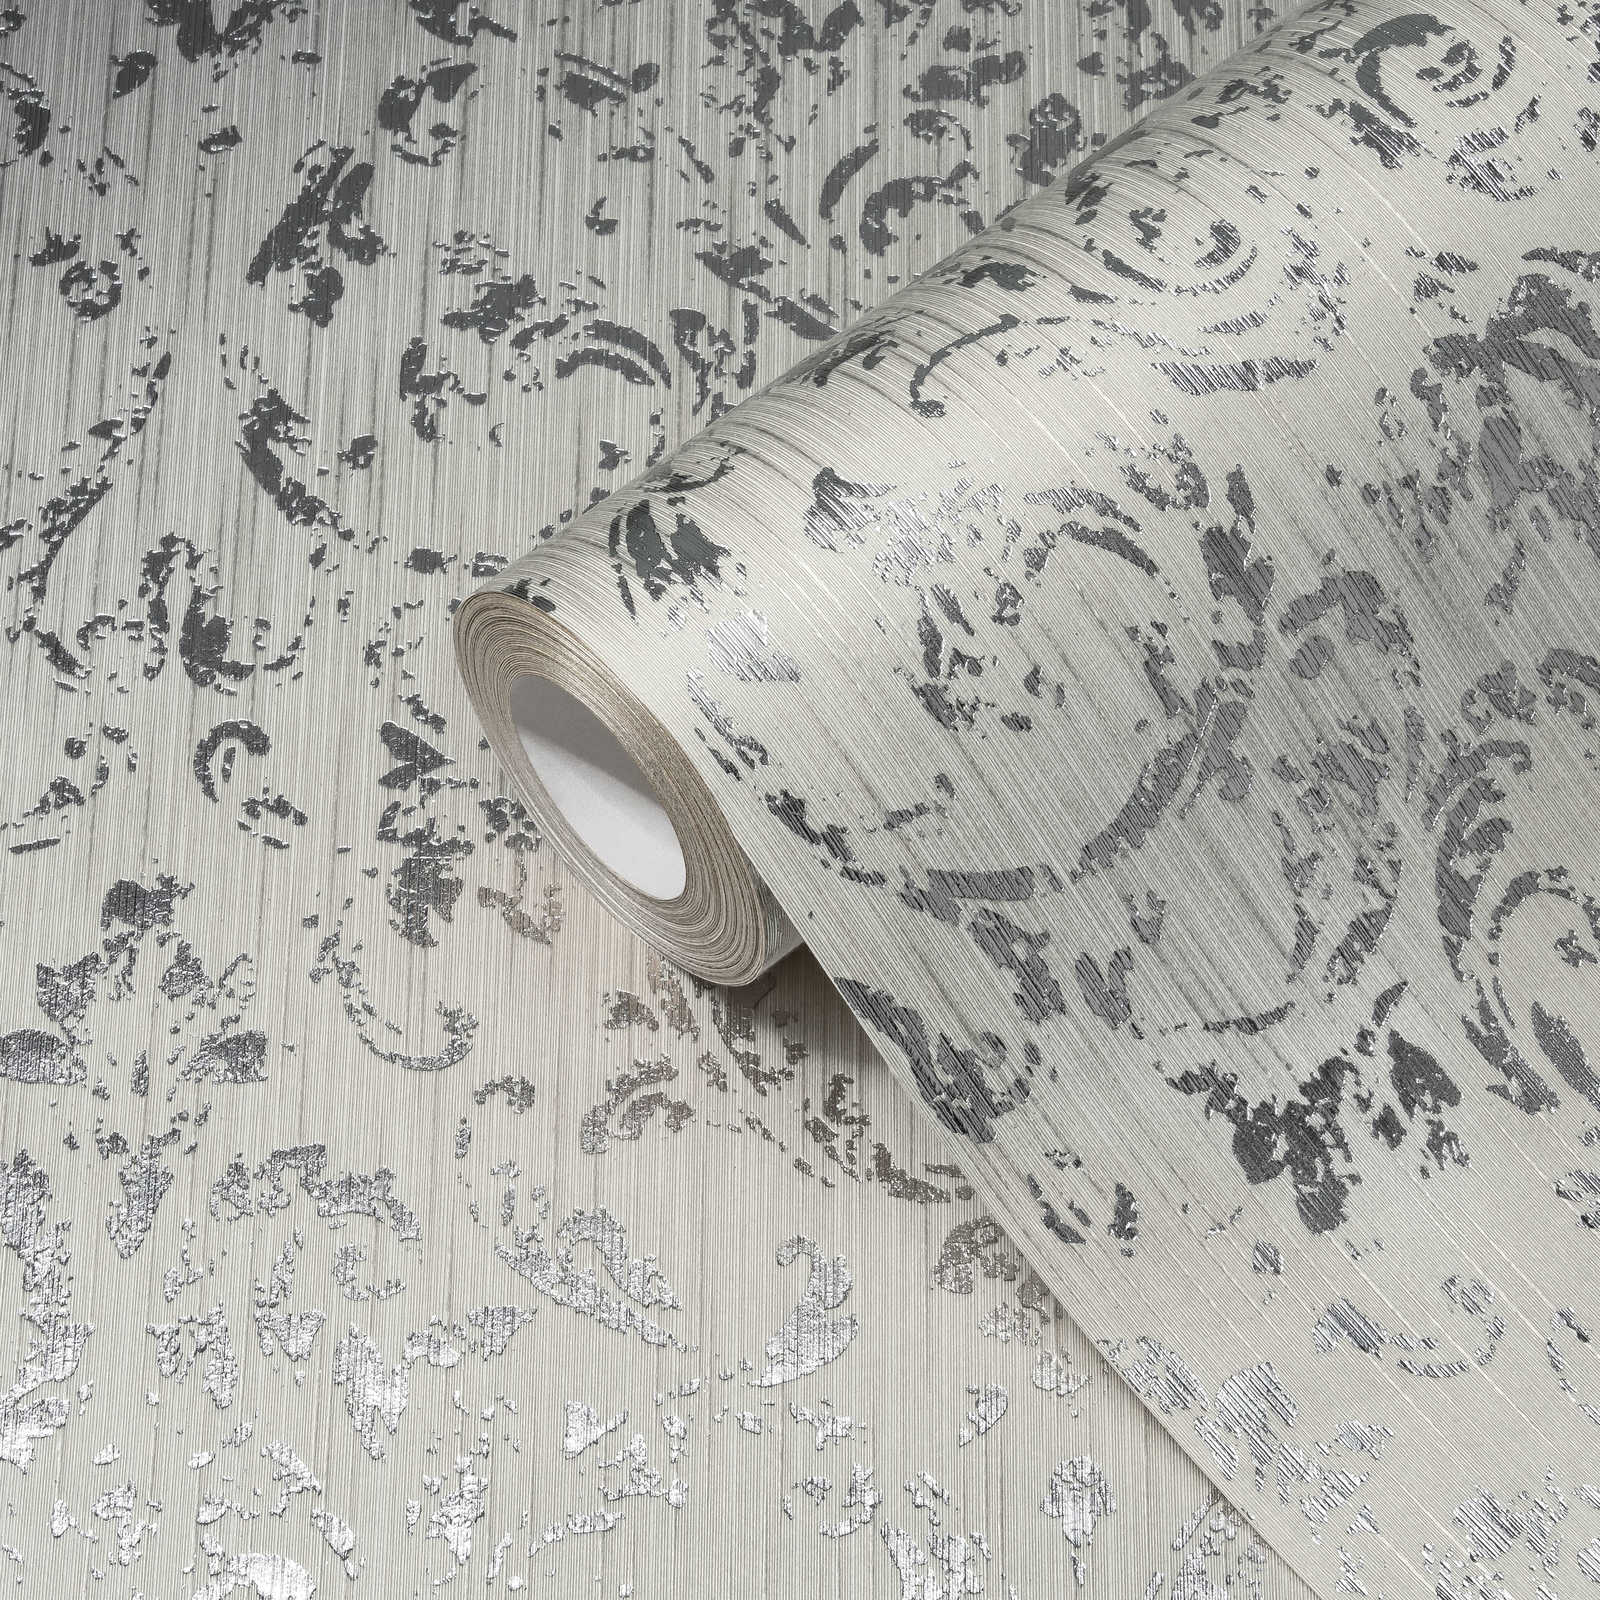             Ornament wallpaper in used look with metallic effect - grey, silver
        